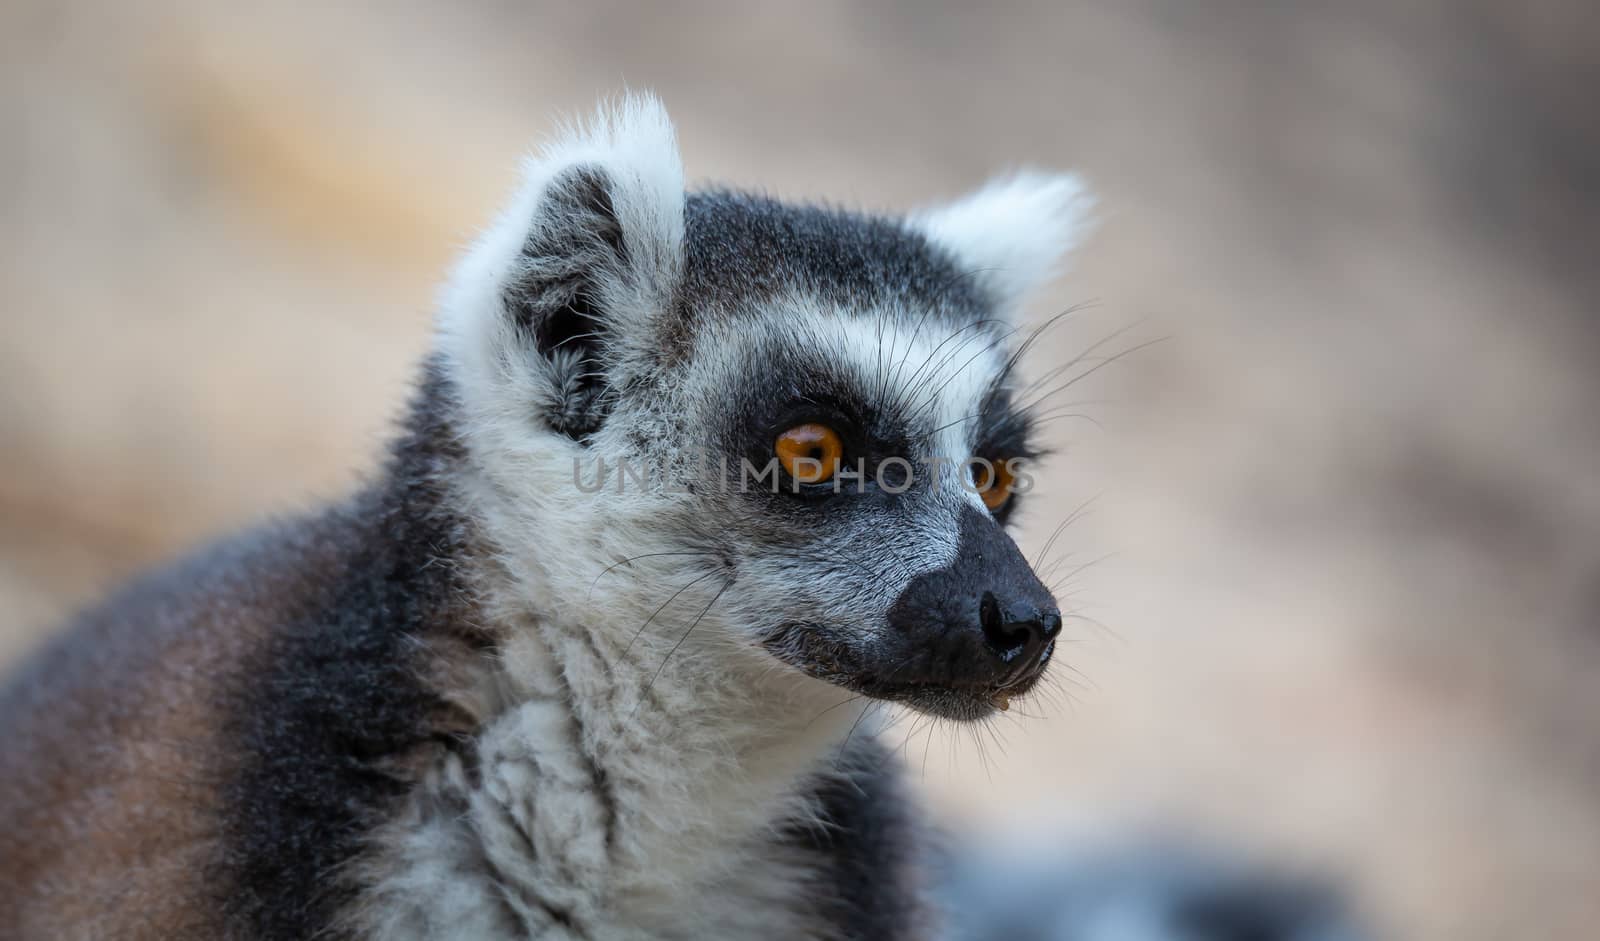 The portrait of a ring-tailed lemur in close-up